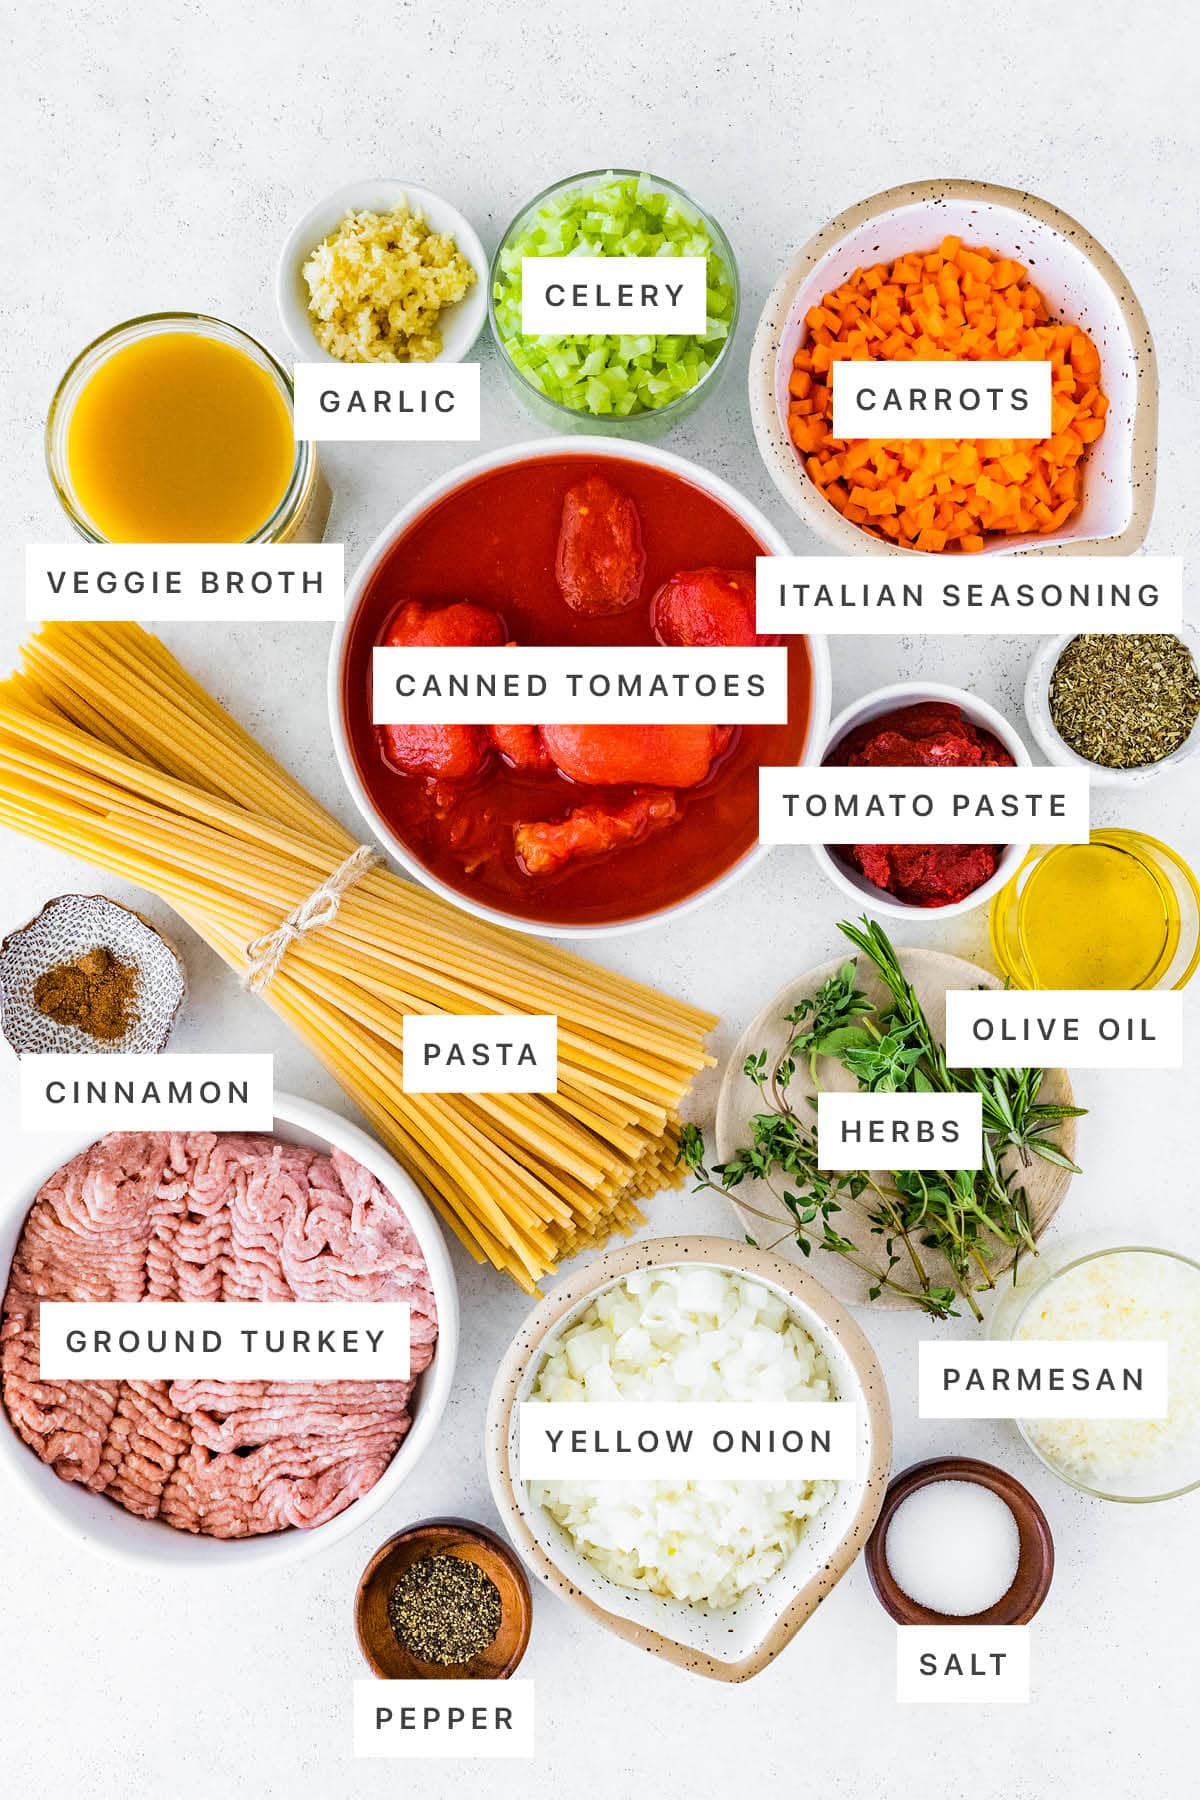 Ingredients measured out to make Turkey Bolognese: veggie broth, garlic, celery, carrots, Italian seasoning, canned tomatoes, tomato paste, cinnamon, pasta, herbs, olive oil, ground turkey, yellow onion, parmesan, salt and pepper.